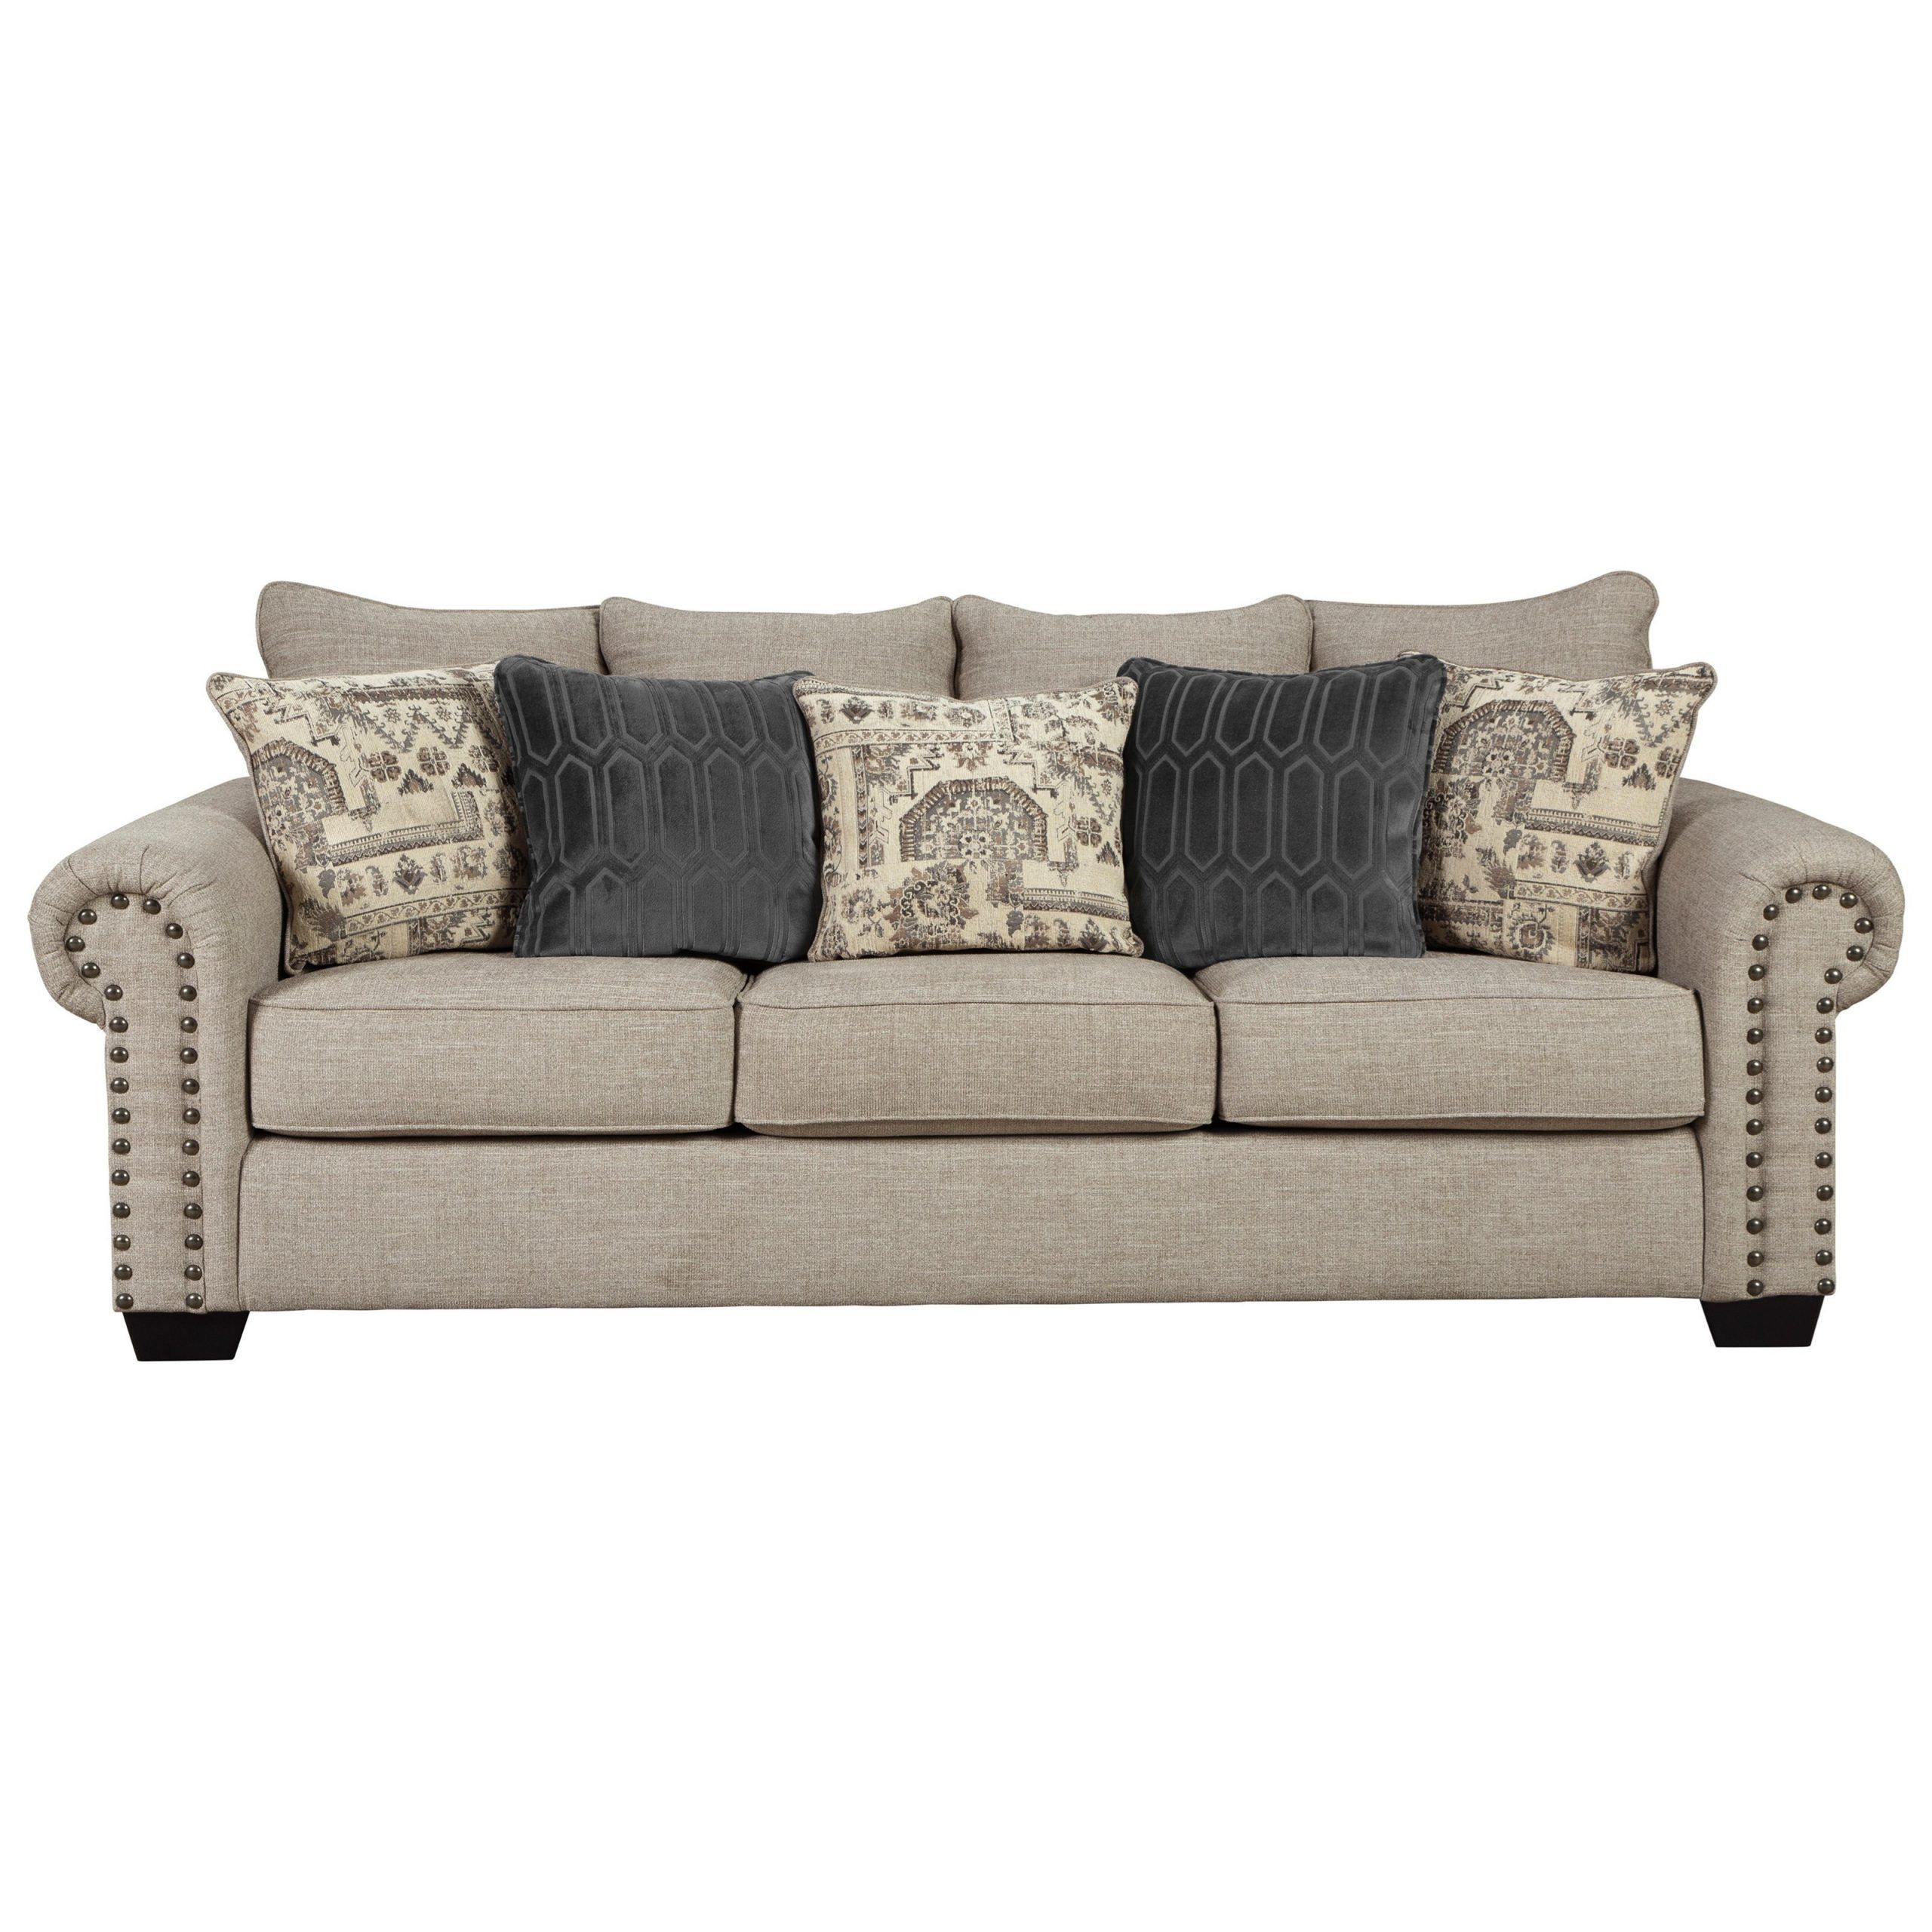 Signature Designashley Zarina 9770438 Transitional In 2pc Polyfiber Sectional Sofas With Nailhead Trims Gray (Photo 4 of 15)